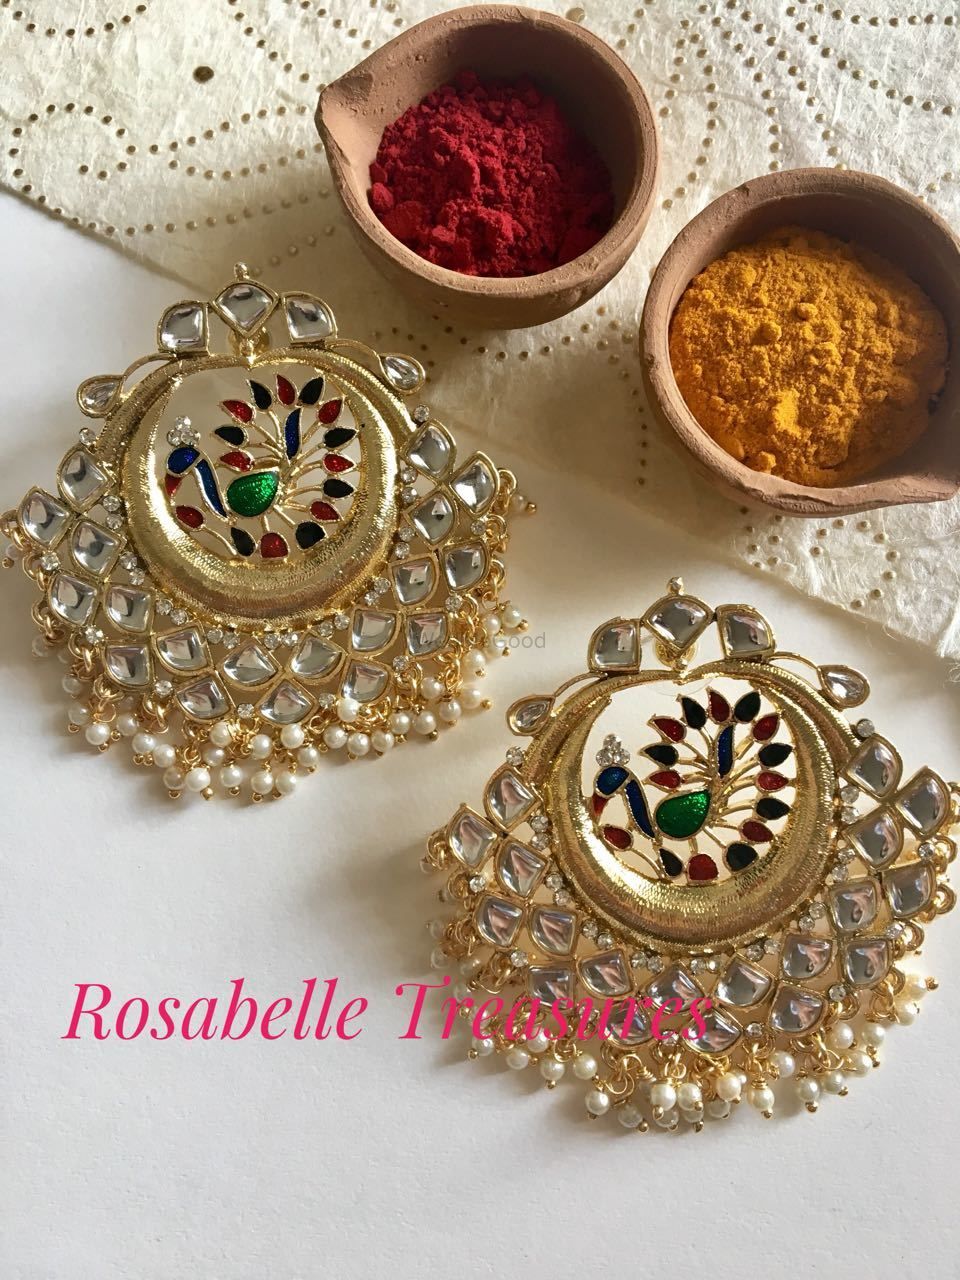 Photo By Rosabelletreasures - Jewellery